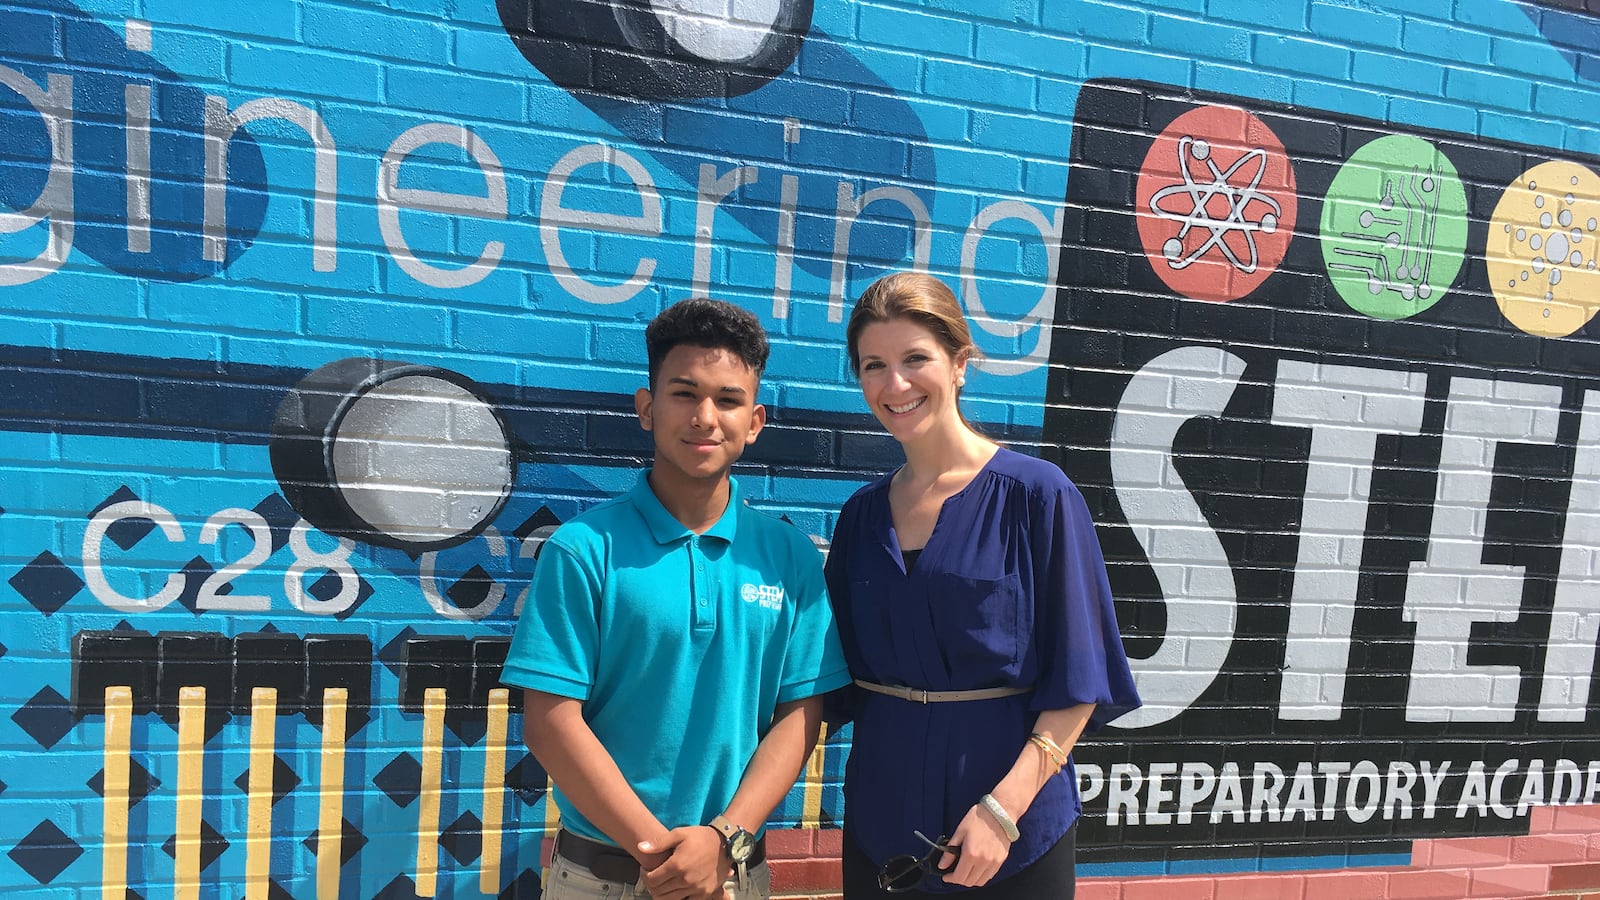 Edgardo, who came to Nashville from Honduras, stands with STEM Prep Middle School principal Kristin McGraner, who was inspired to start a special program for students like Edgardo who are new to speaking English.